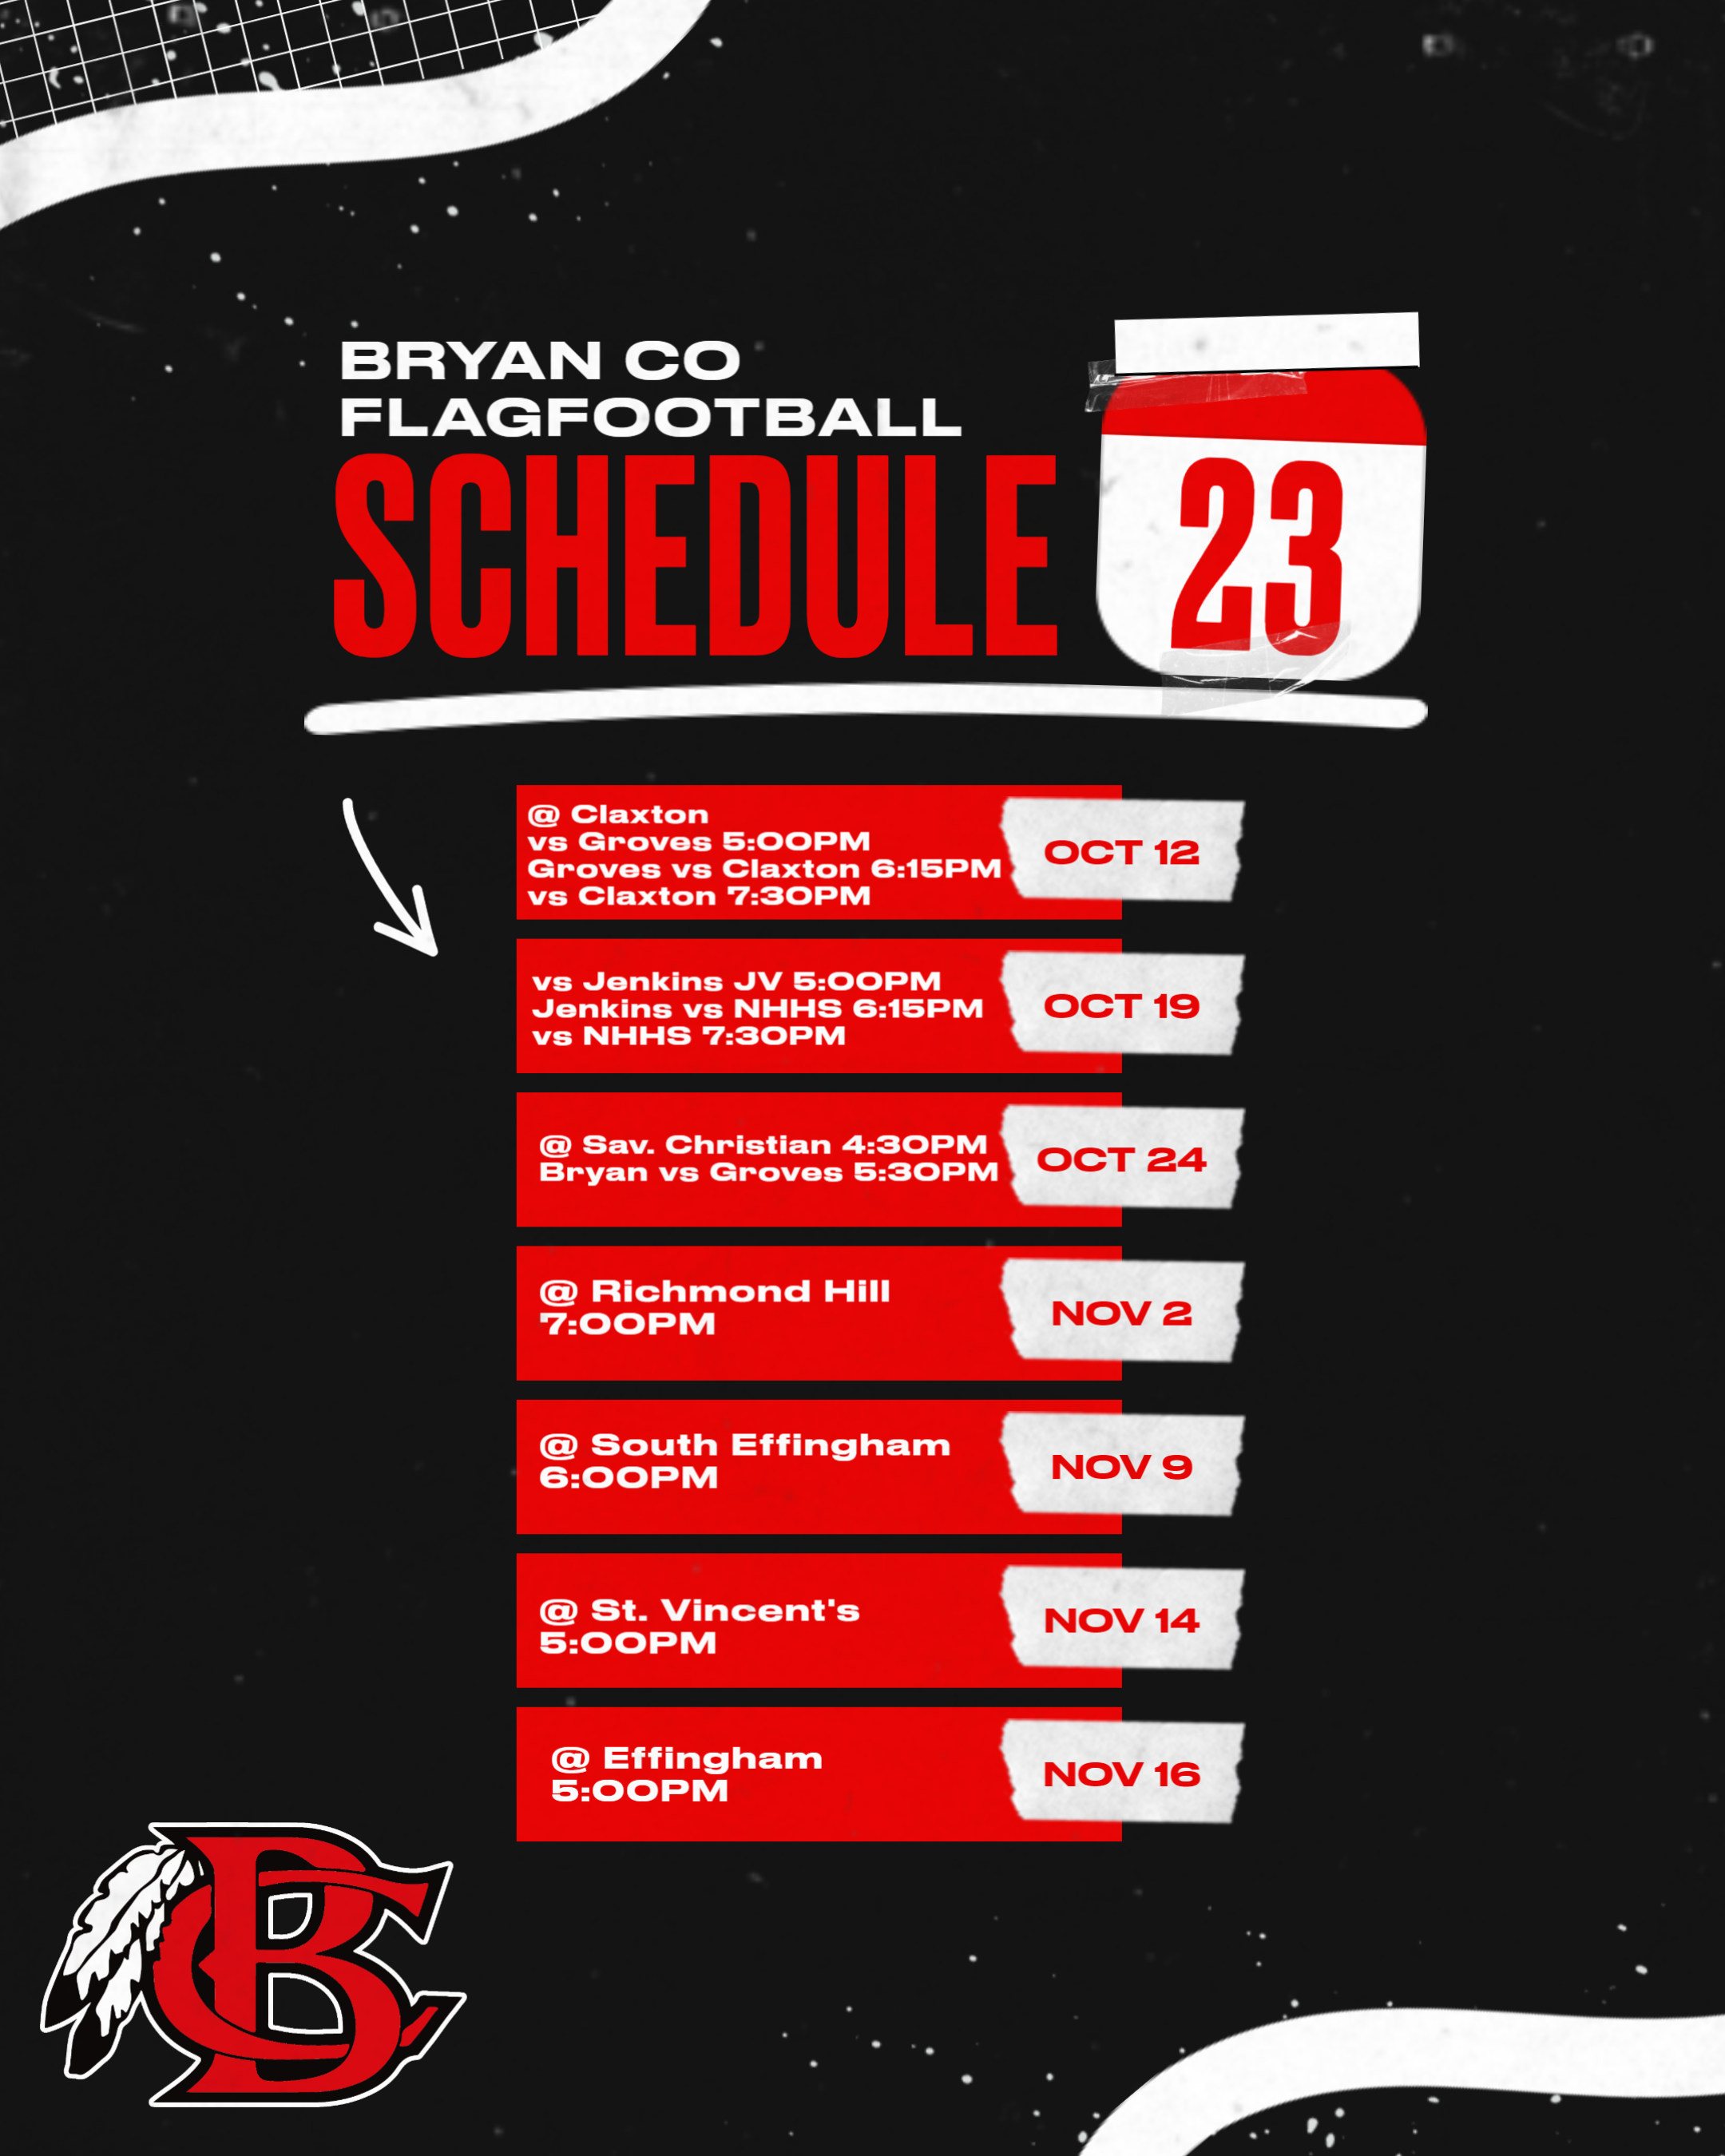 MS Football Schedule